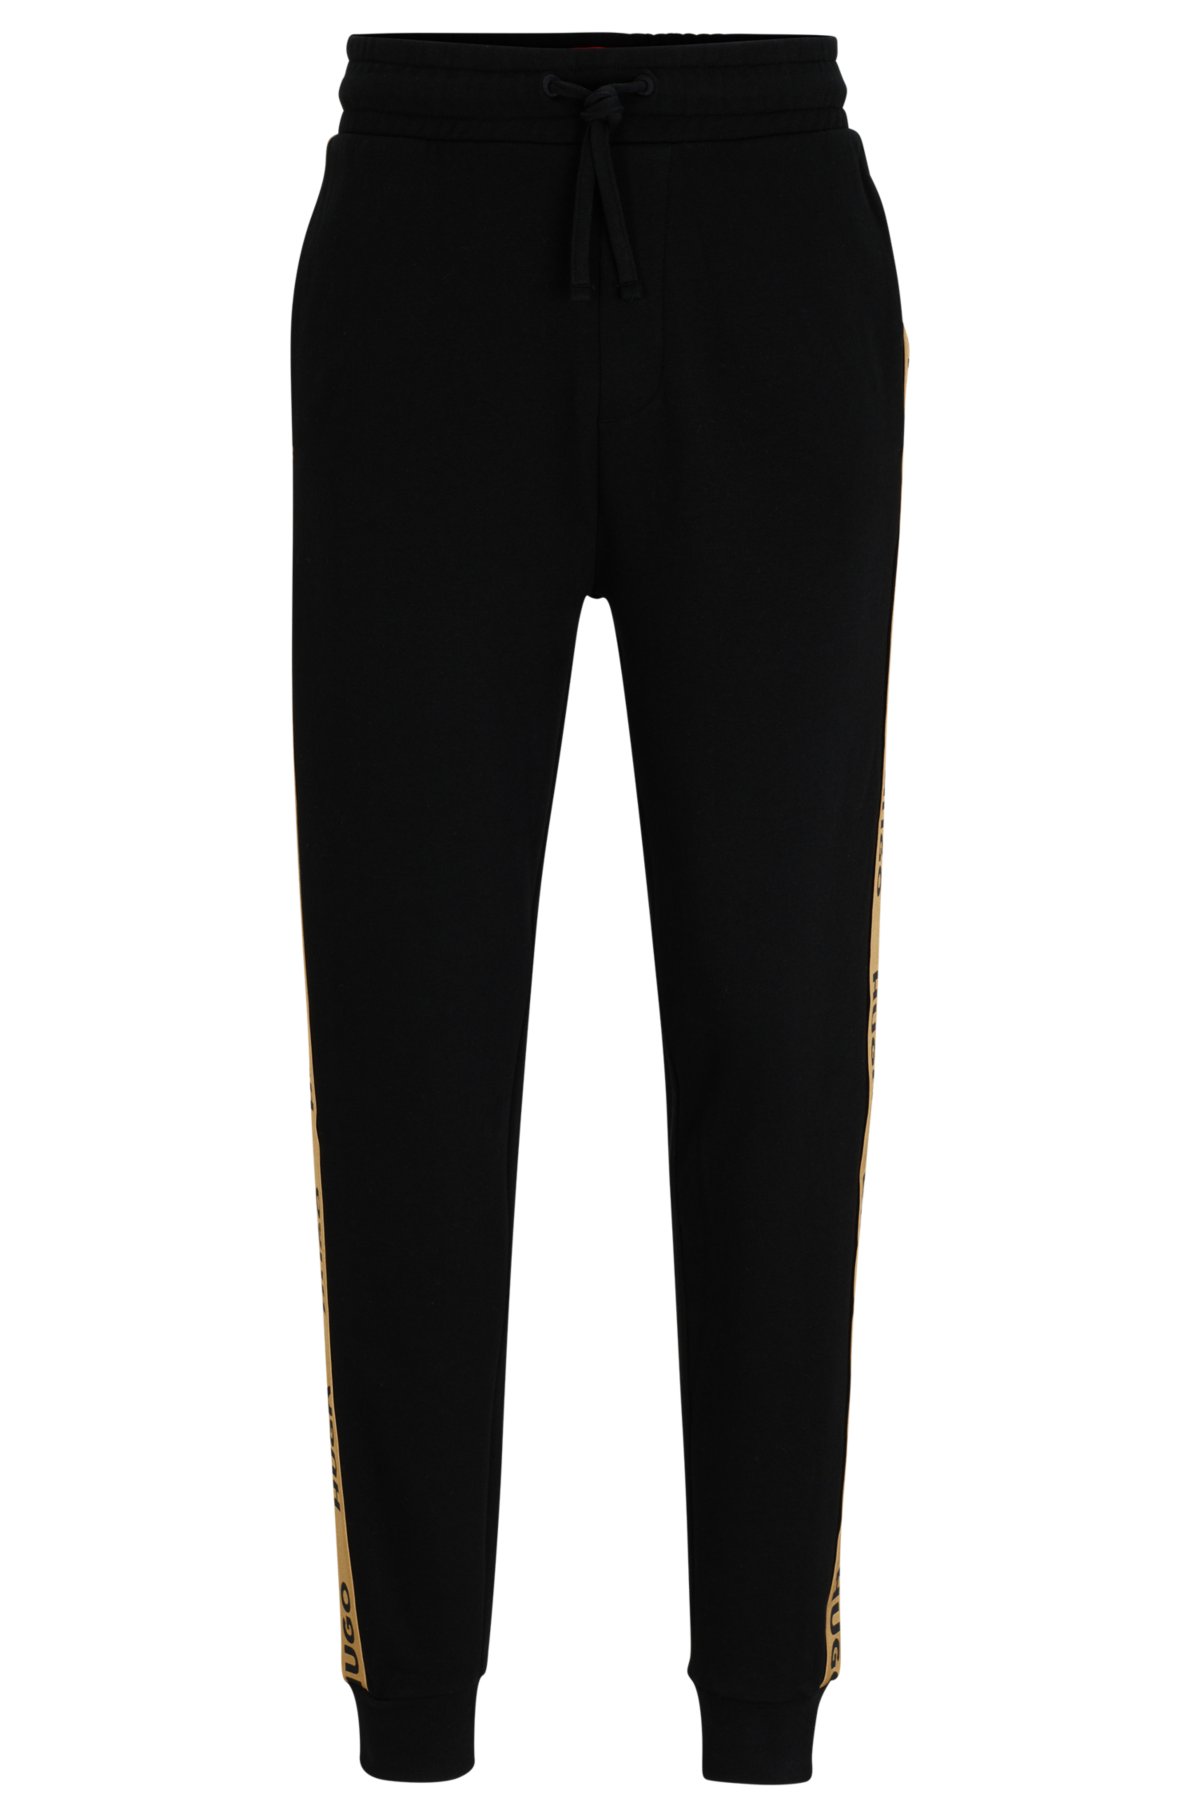 HUGO logo bottoms tape in Cuffed - with tracksuit